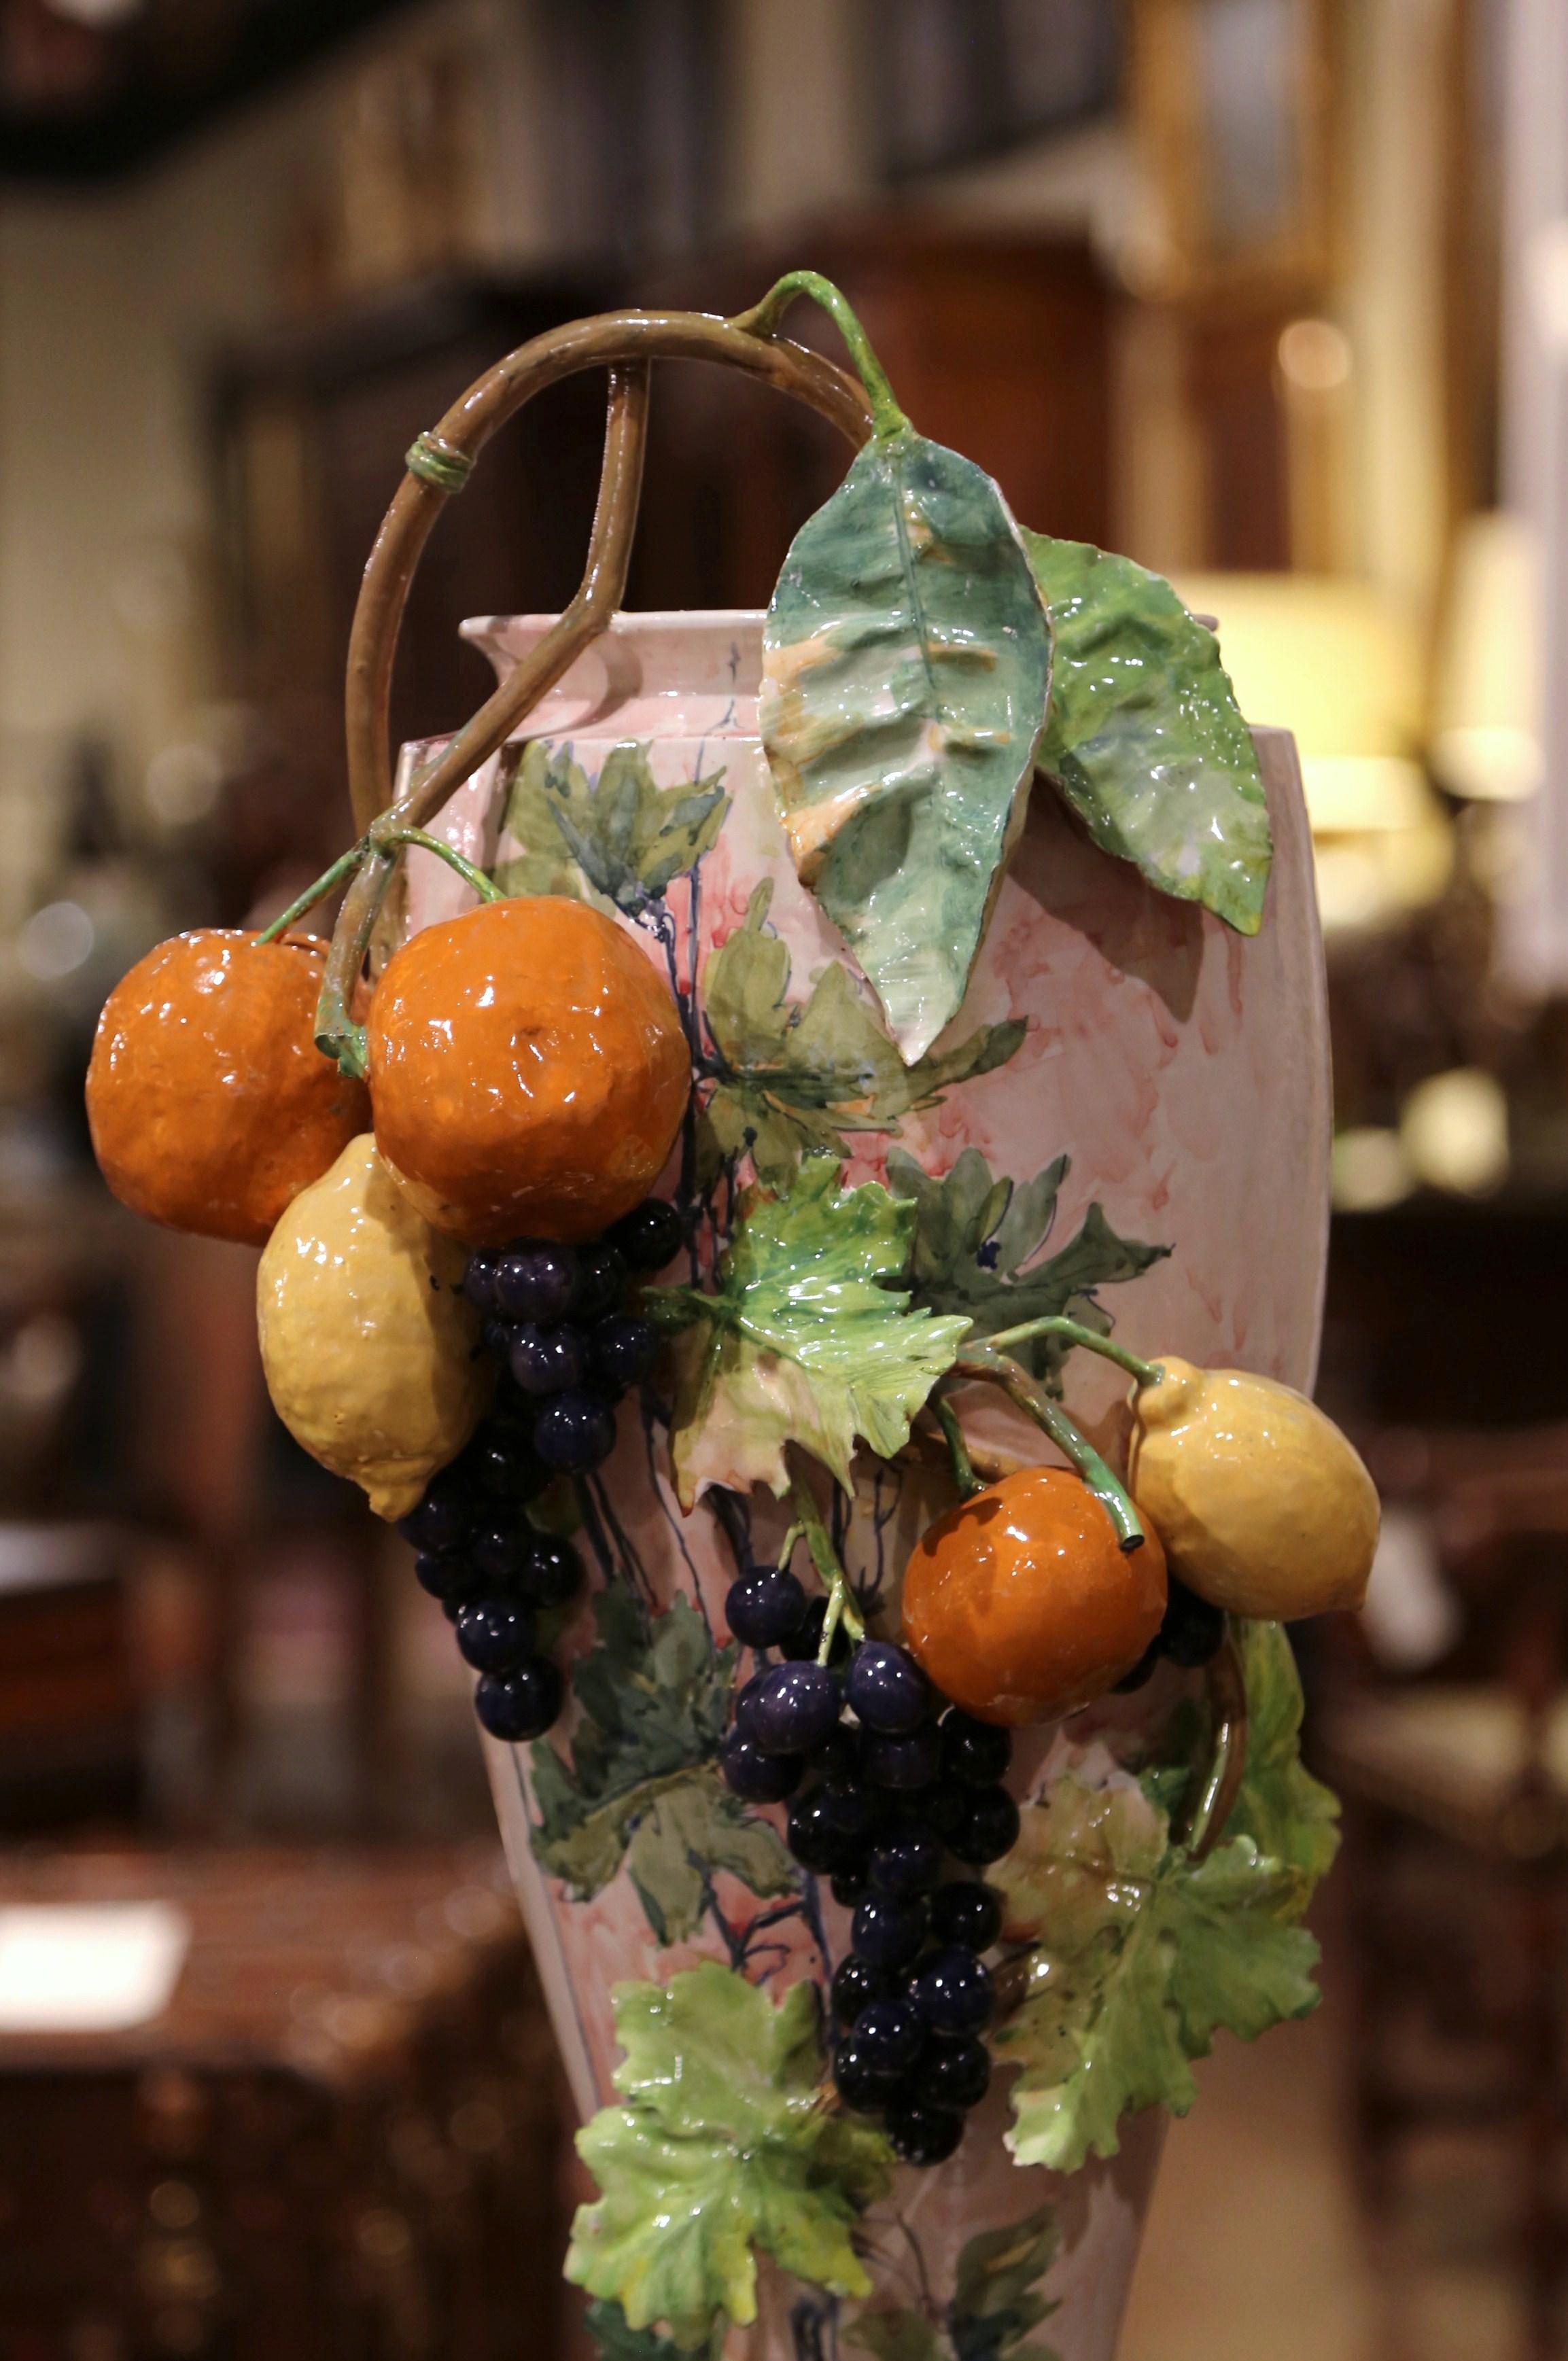 This large, antique hand painted majolica vase was created in France, circa 1890. The tall vase features high relief fruit and leaf decor including grape, oranges, lemons and vine motifs. The colorful vessel is in excellent condition with rich